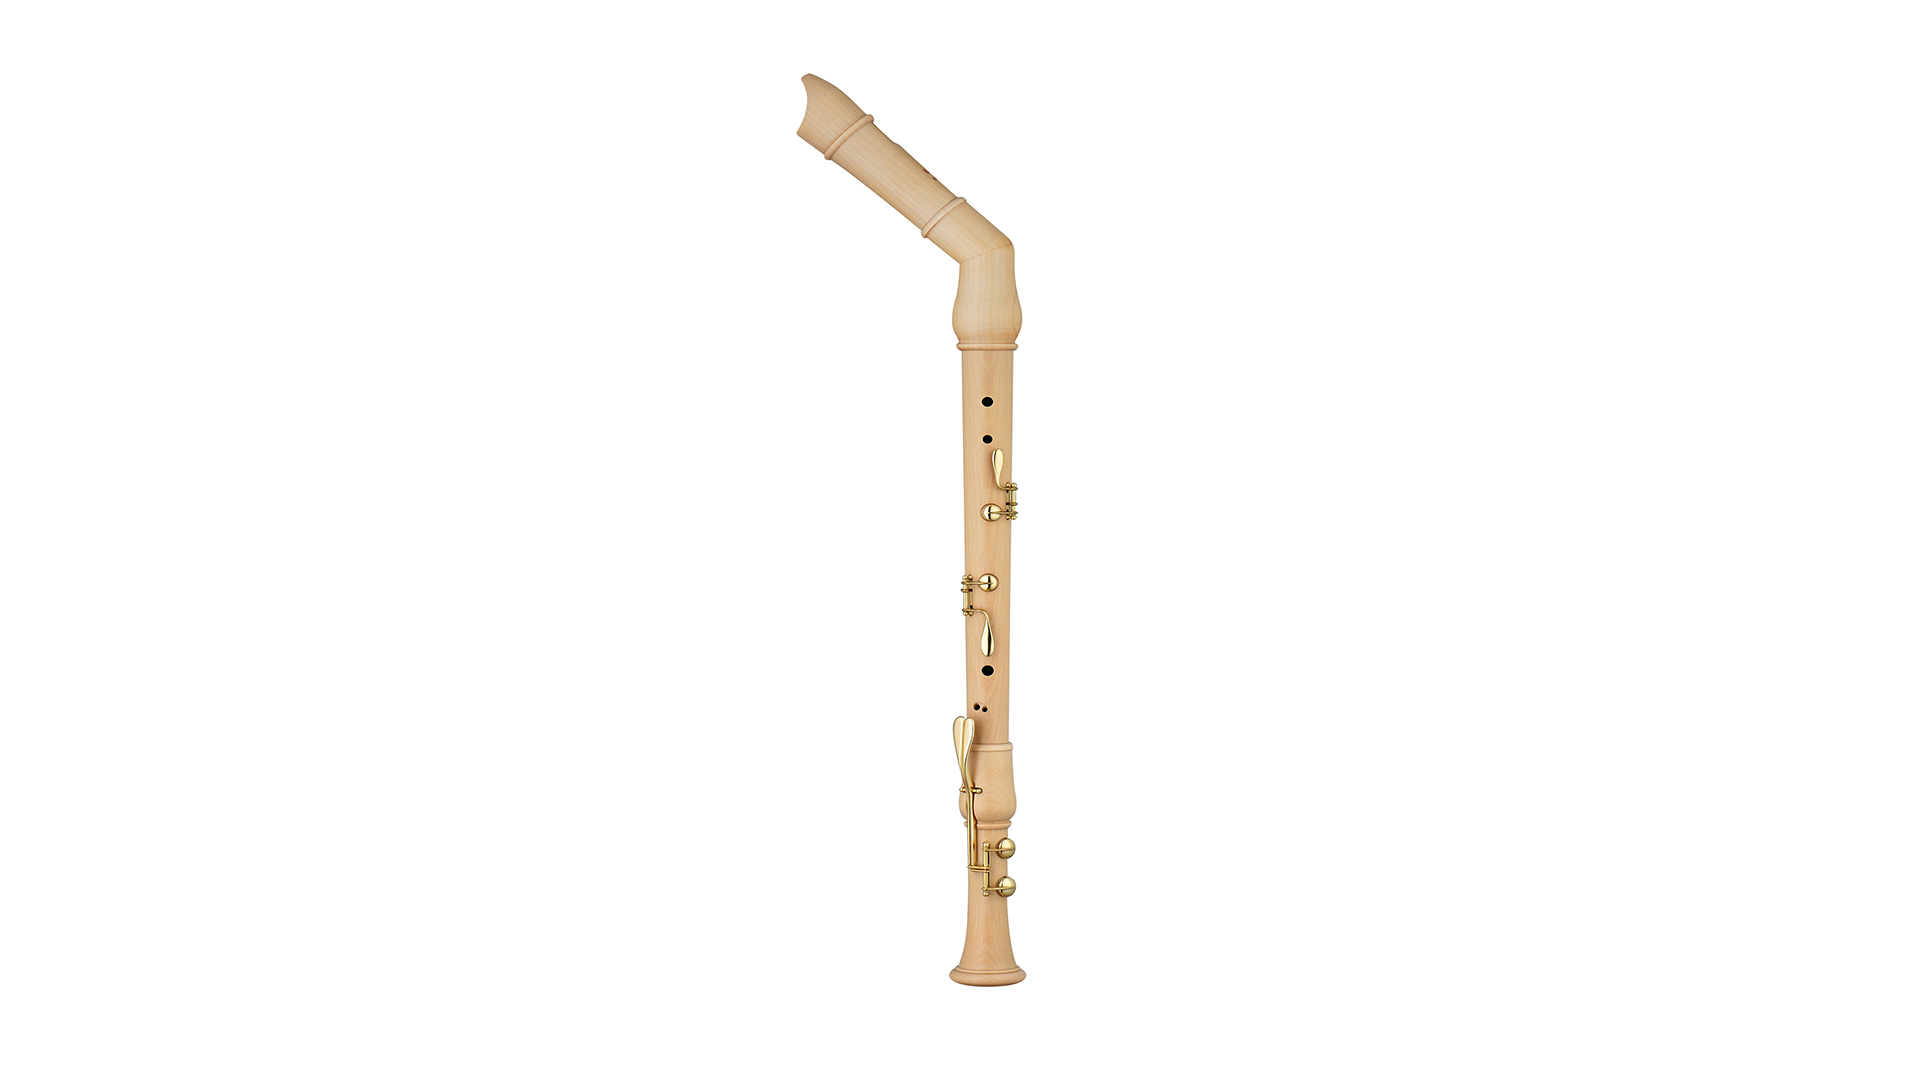 Moeck, Flauto Rondo bent bass in f', baroque double hole, maple